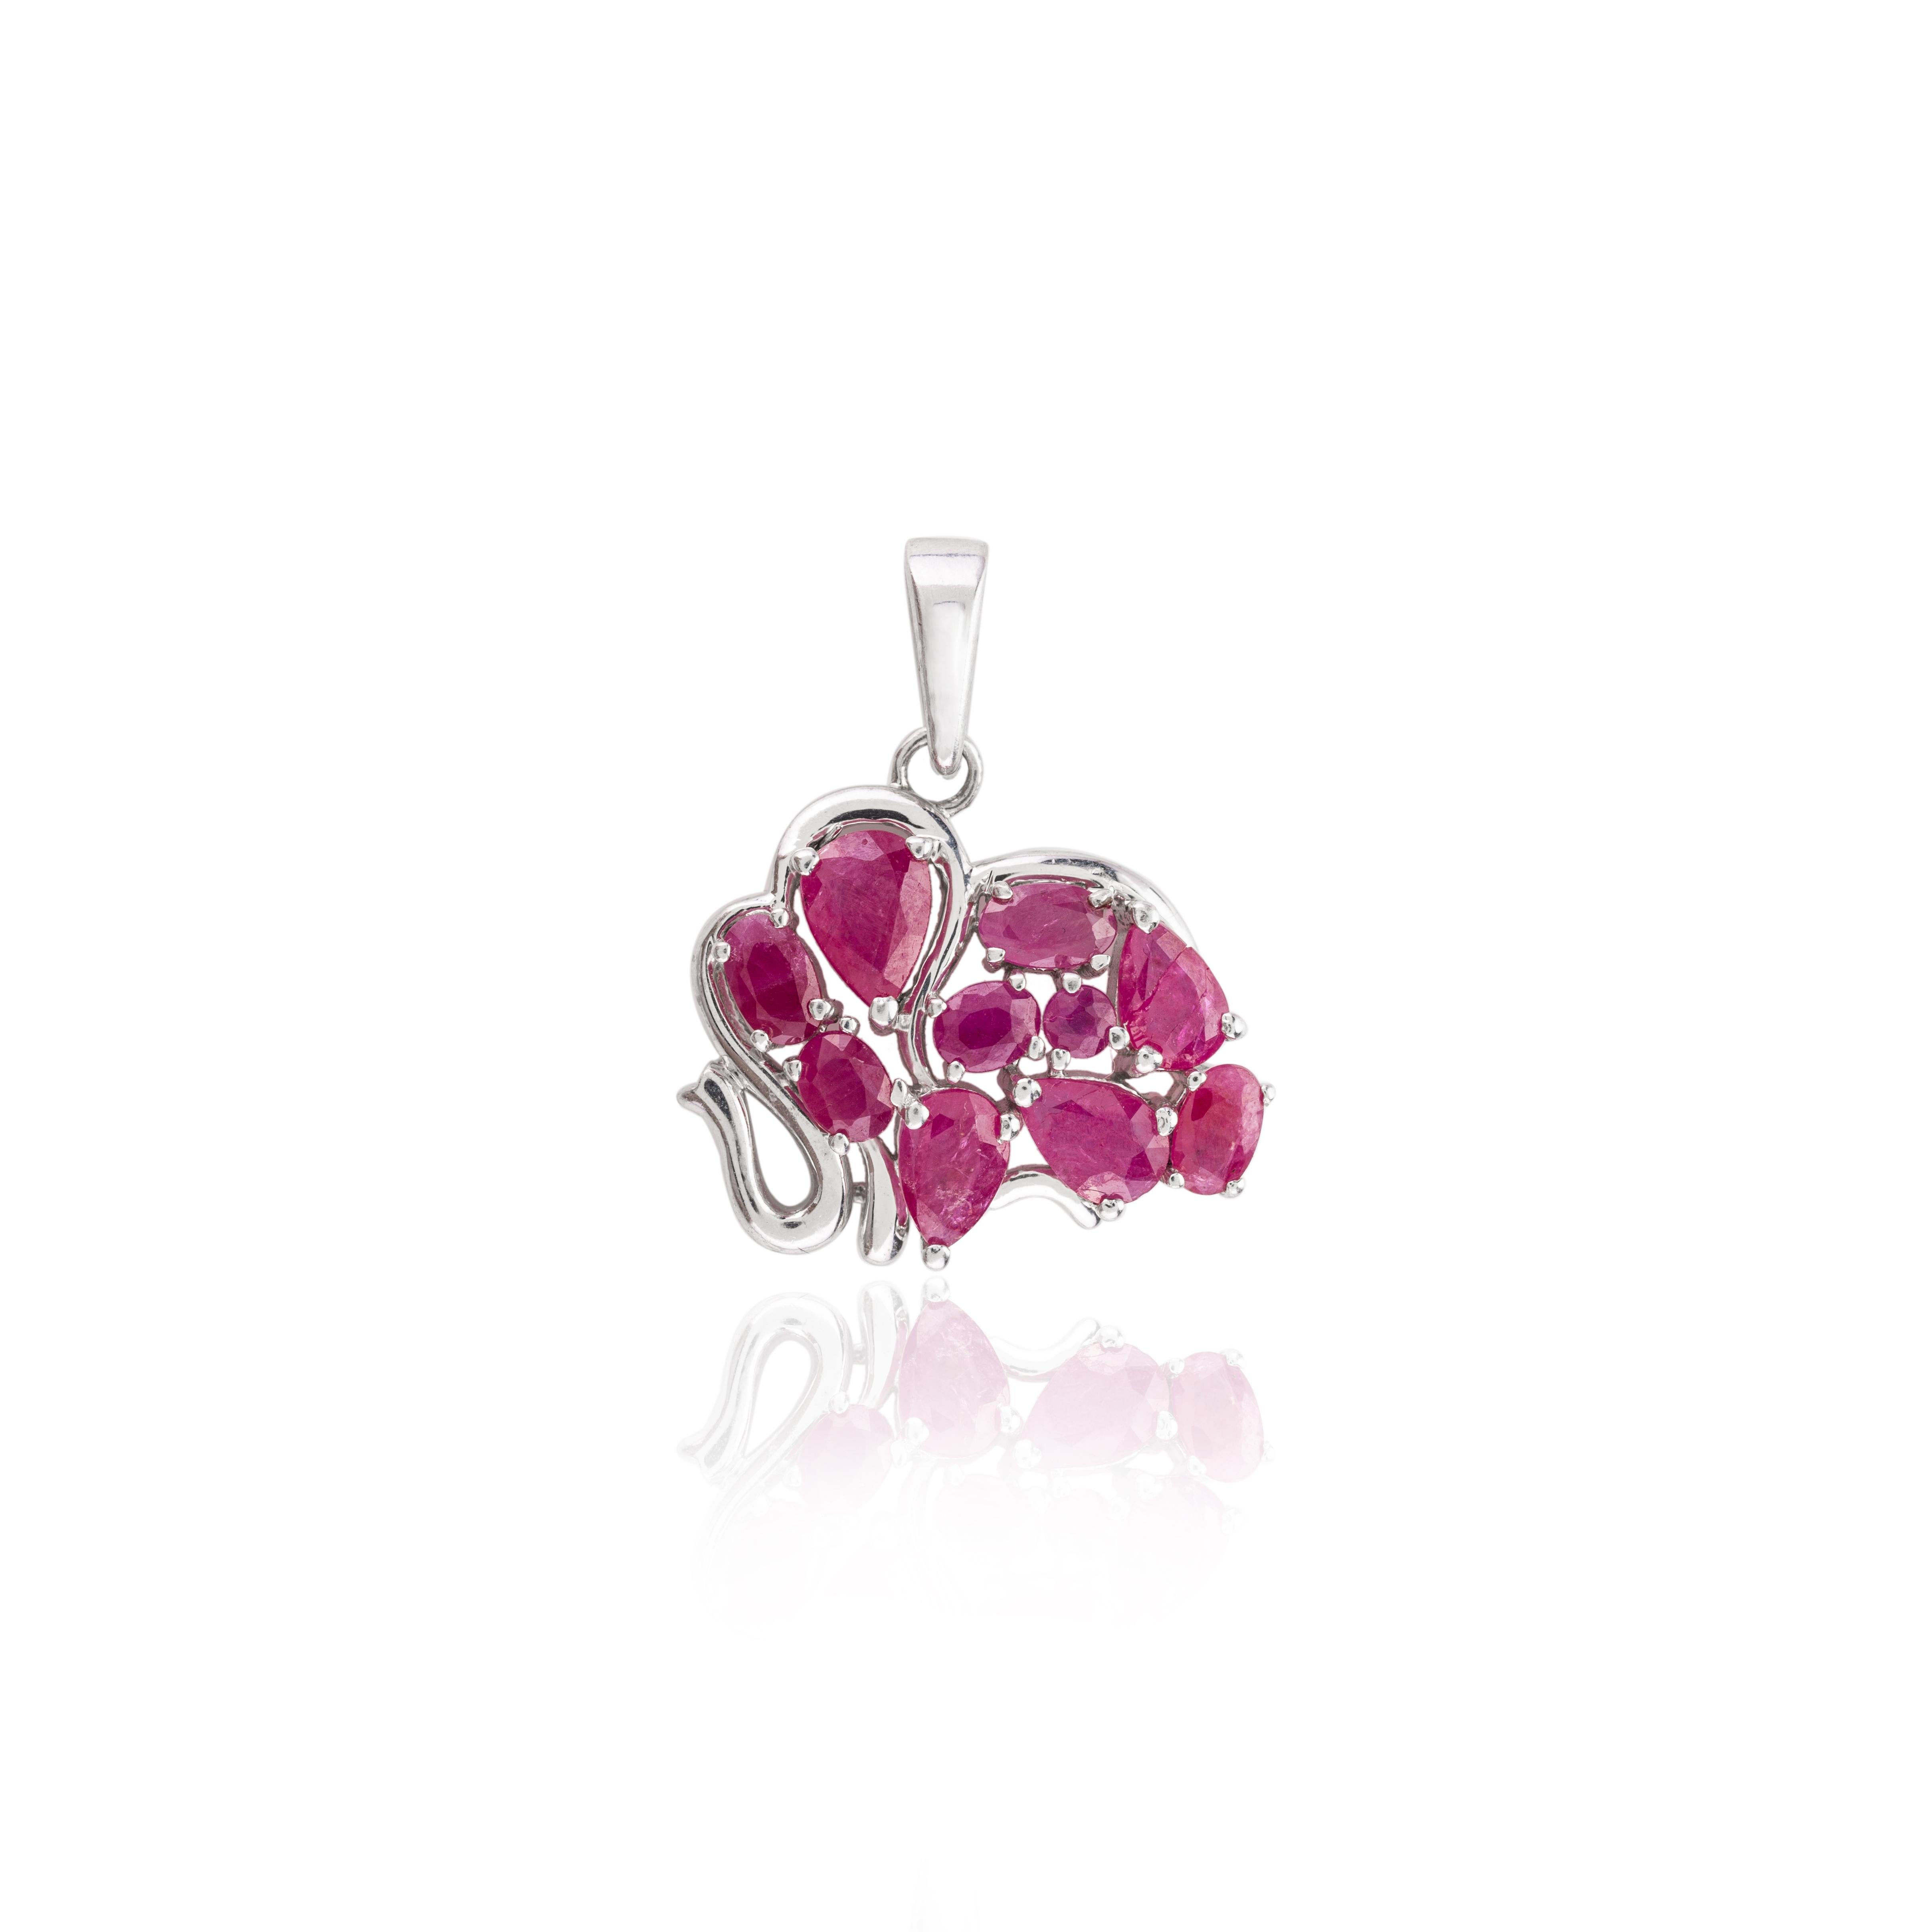 Women's Ruby Birthstone Sterling Silver Elephant Pendant Gifts, 925 Silver Jewelry For Sale